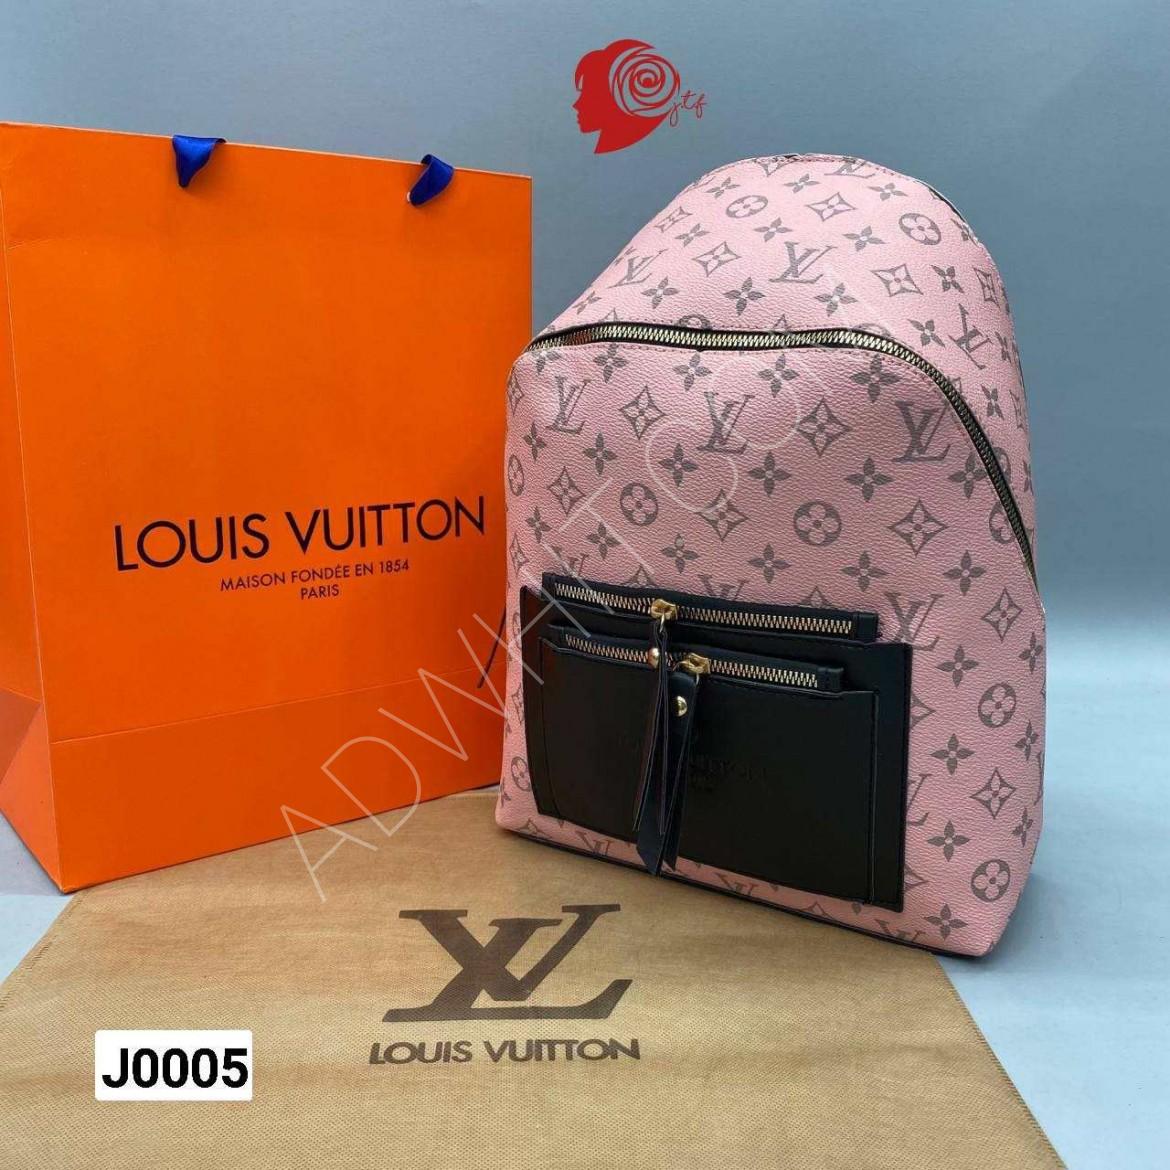 School bag and Louis Vuitton backpack - Price : 11 US Dollar